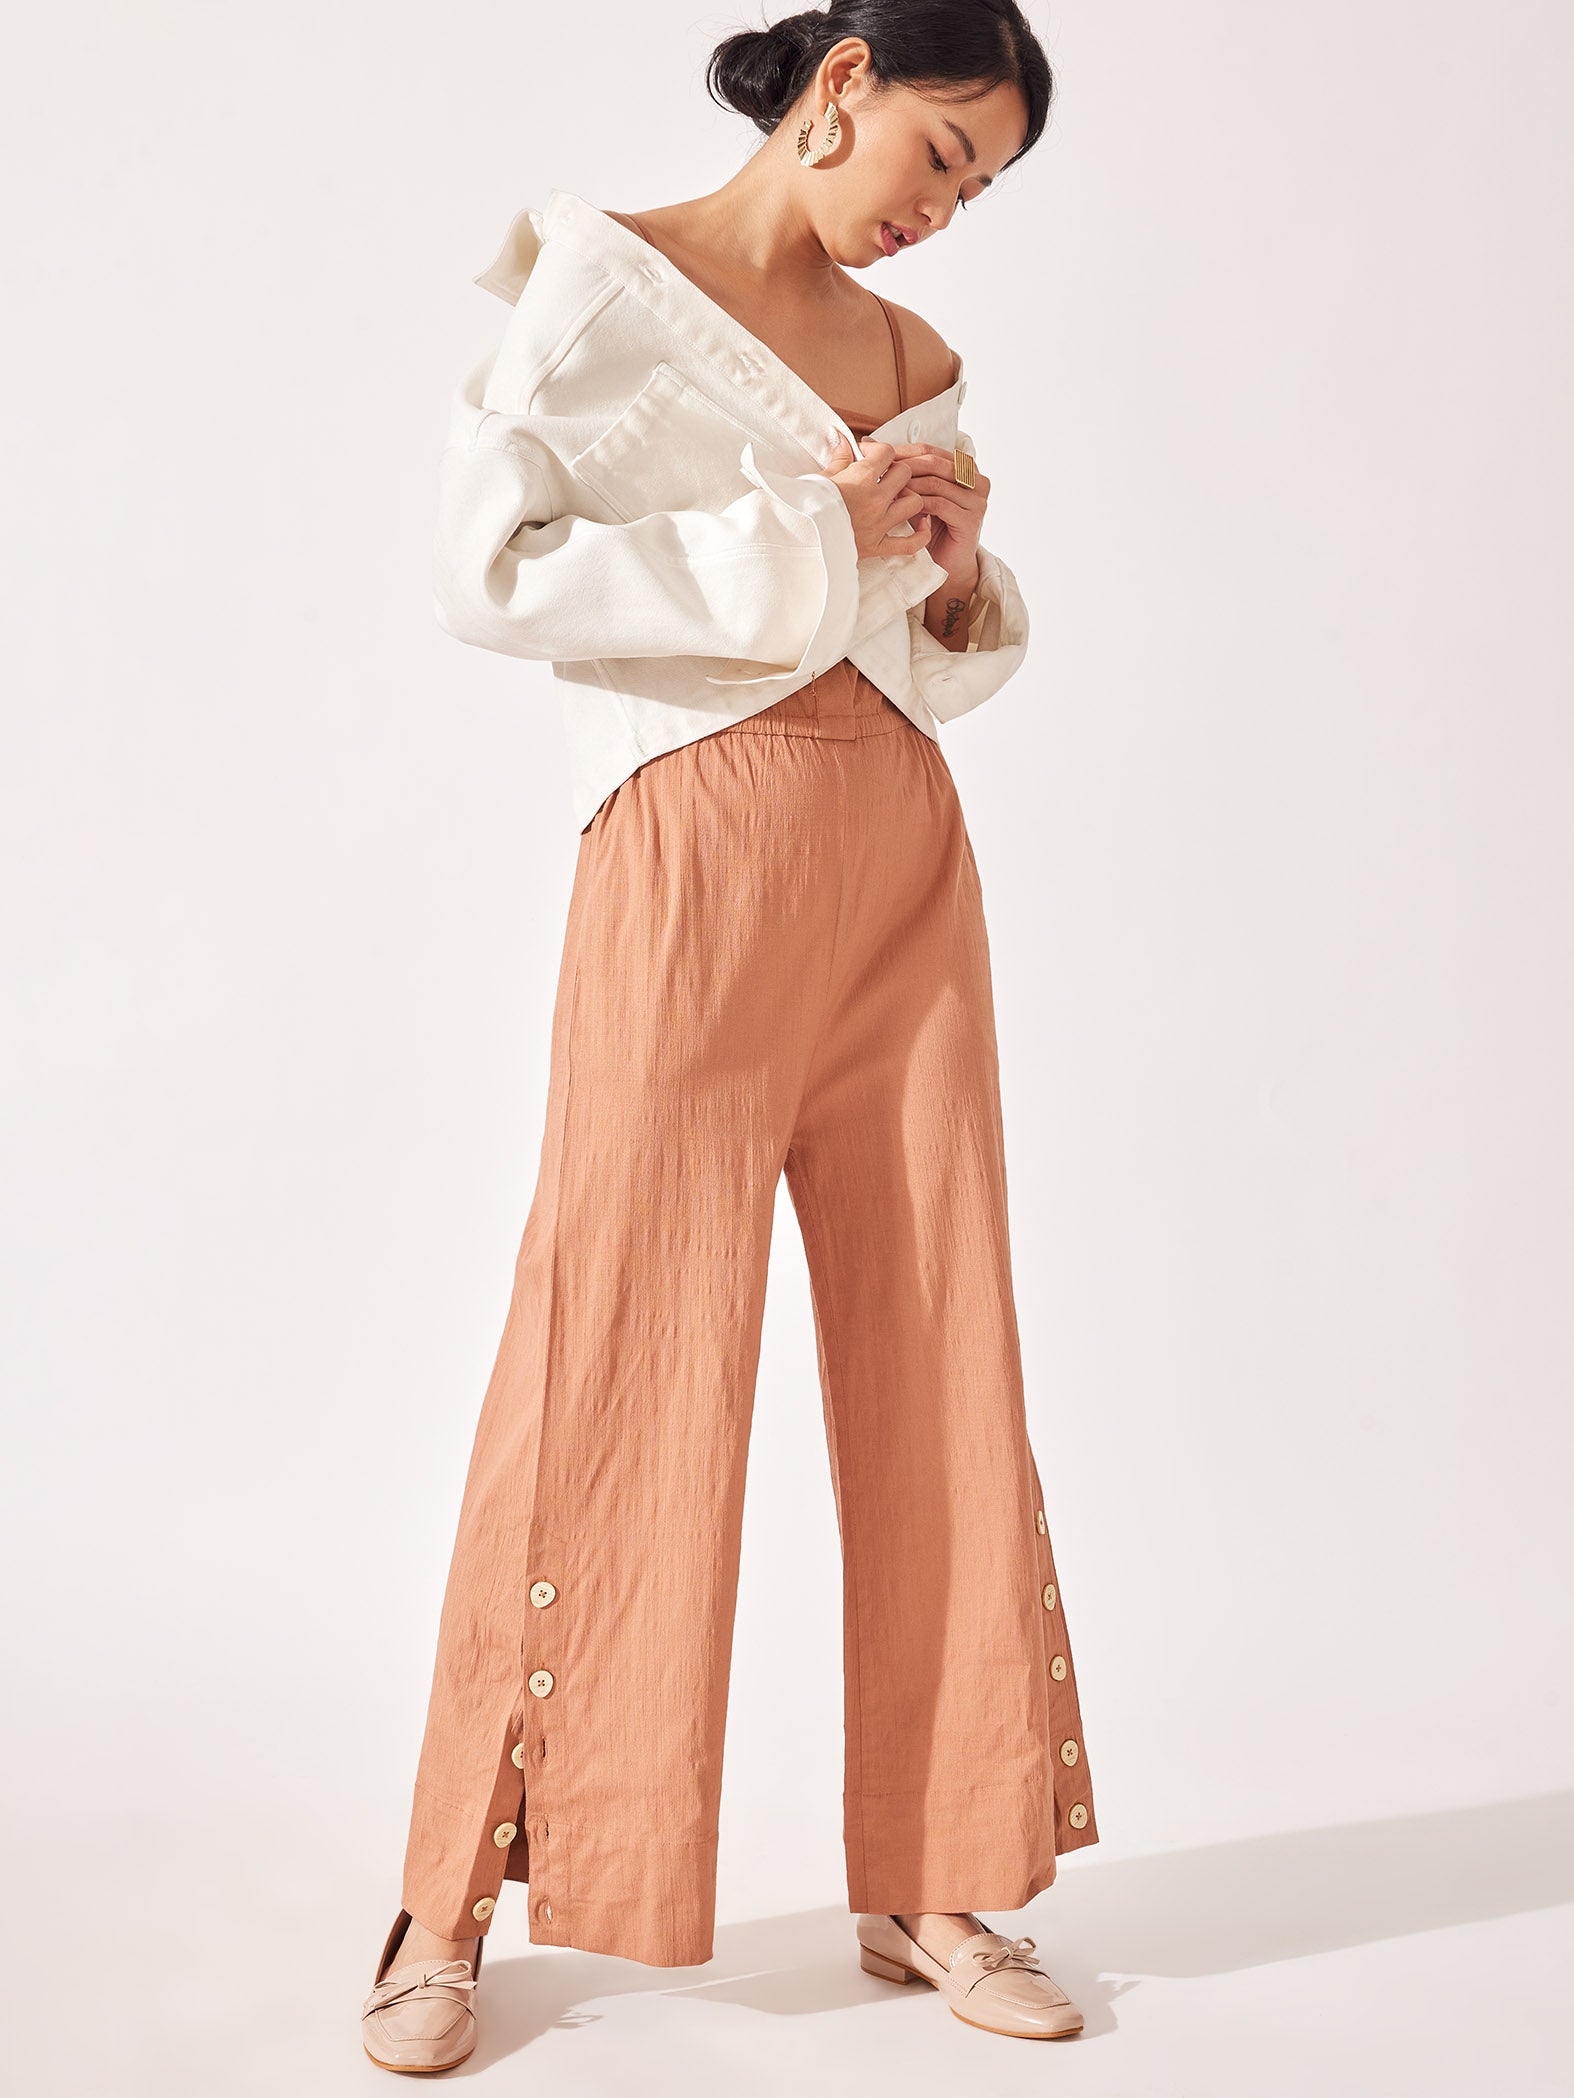 Dusty Rose Strappy Jumpsuit